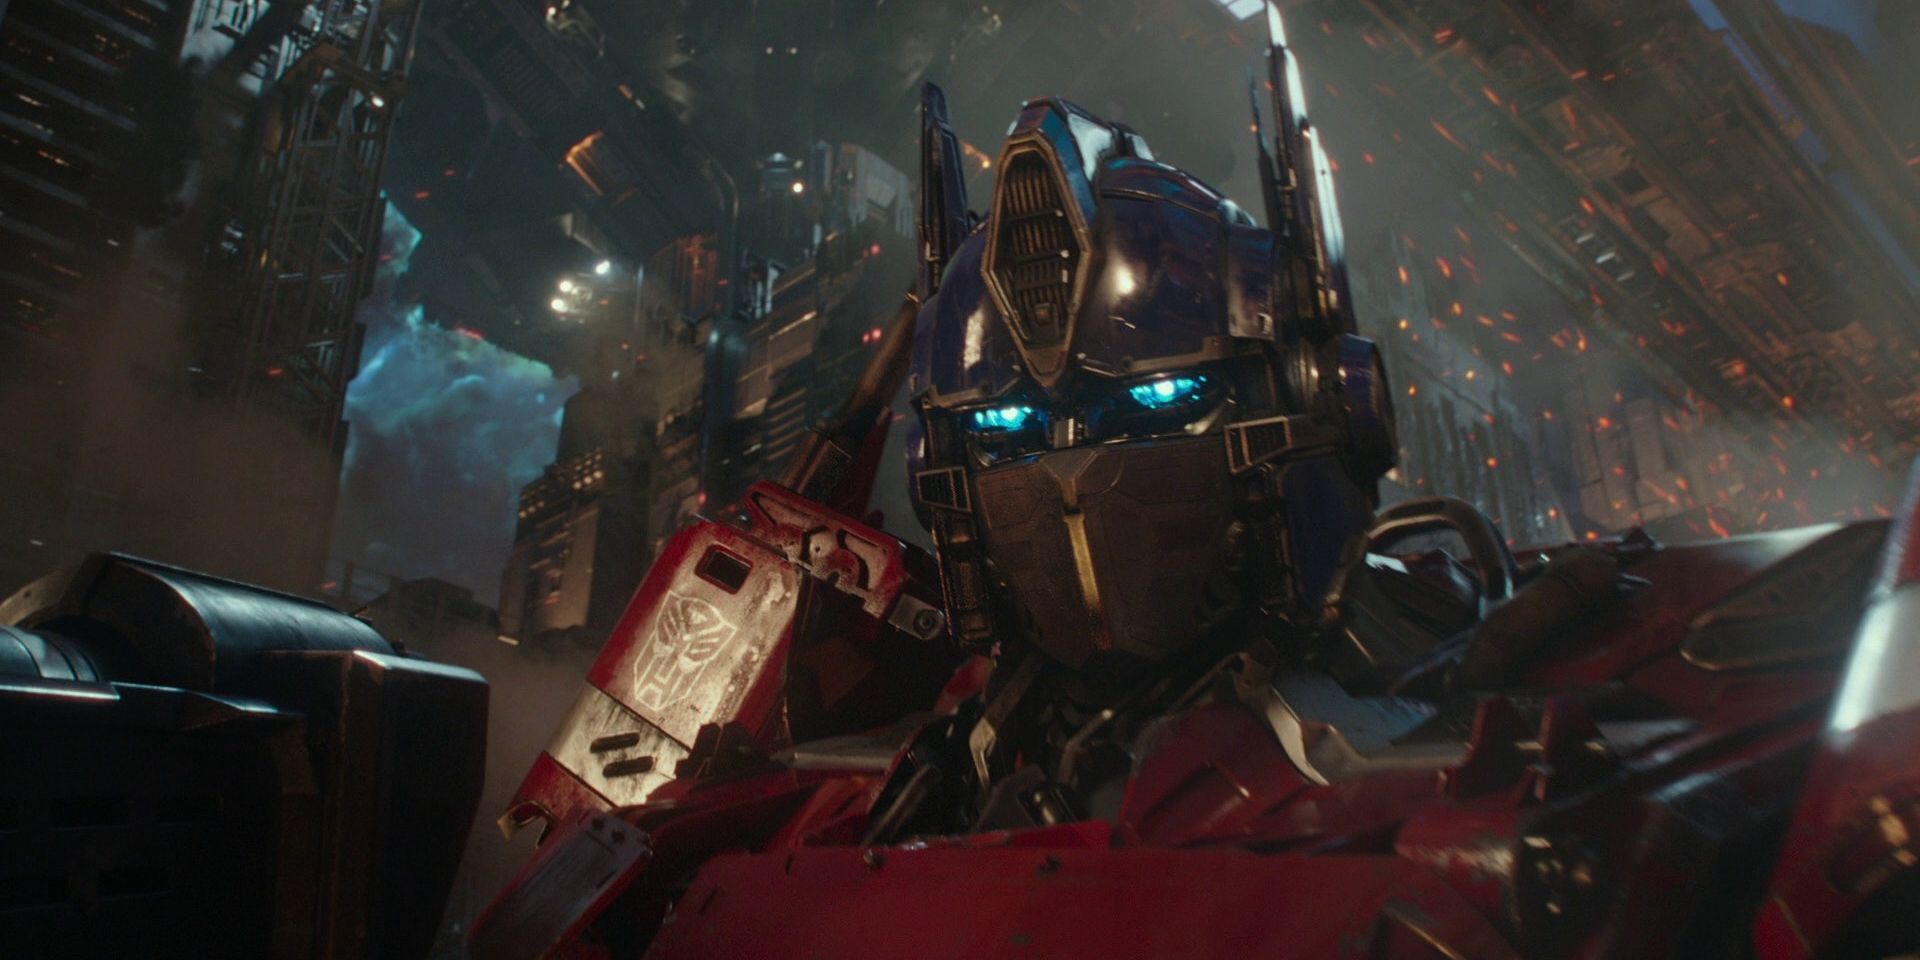 Transformers One's Autobots and Decepticons, Explained